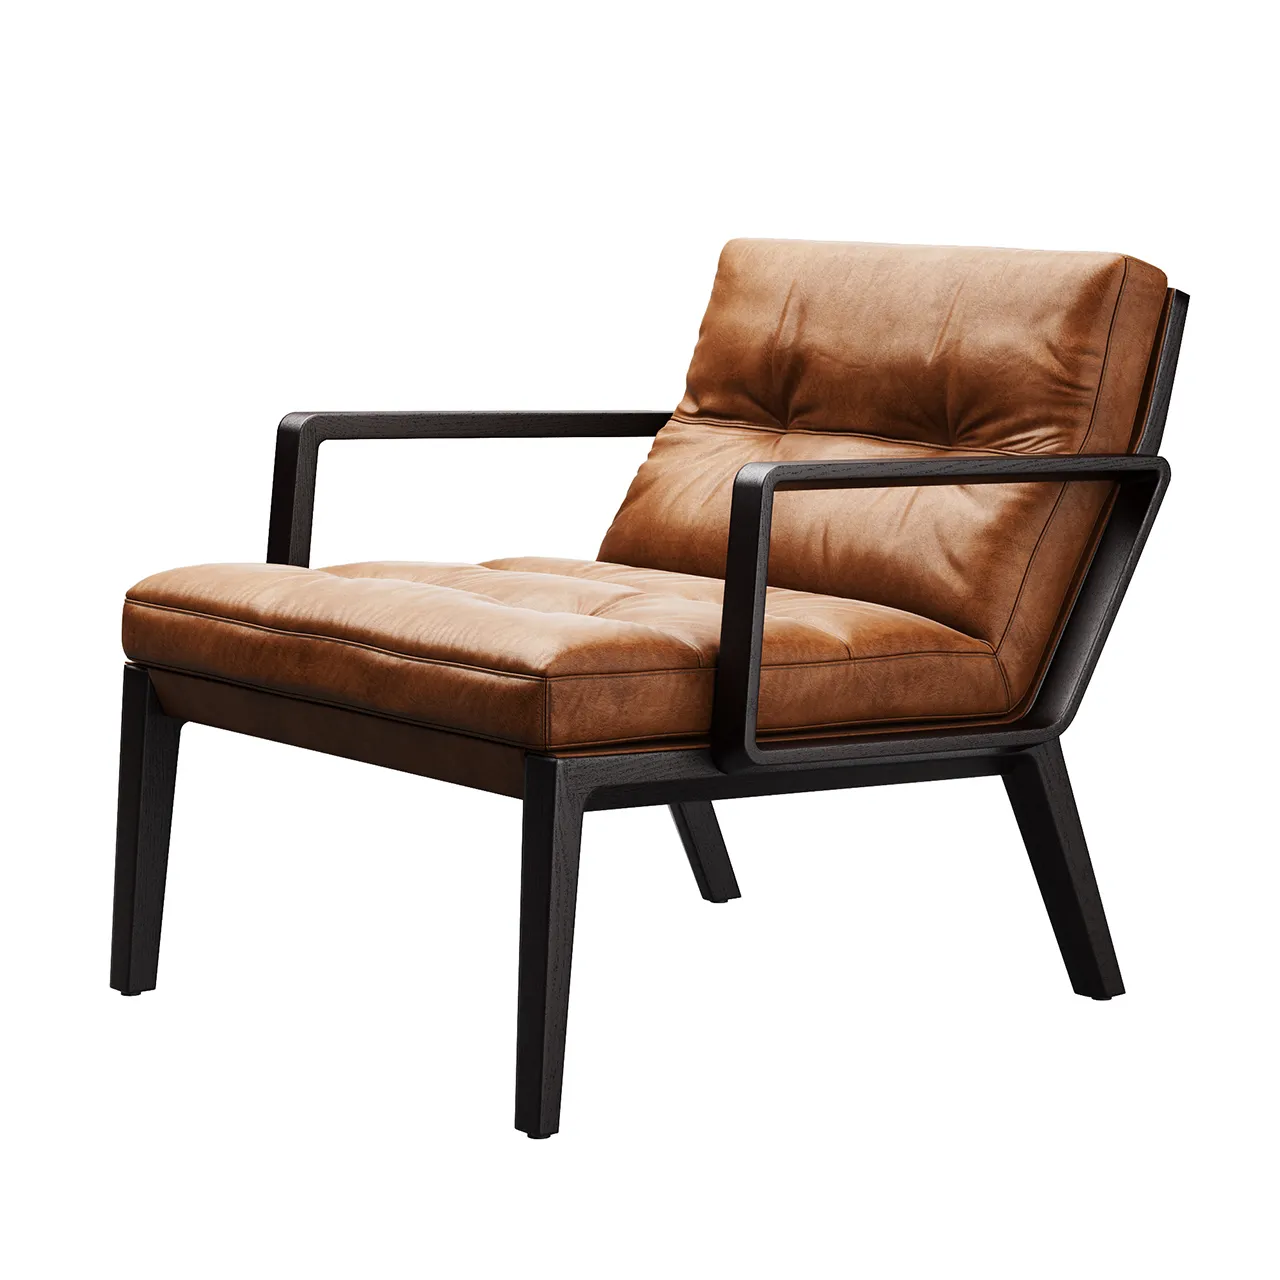 Furniture – andoo-lounge-chair-1131-by-walter-knoll